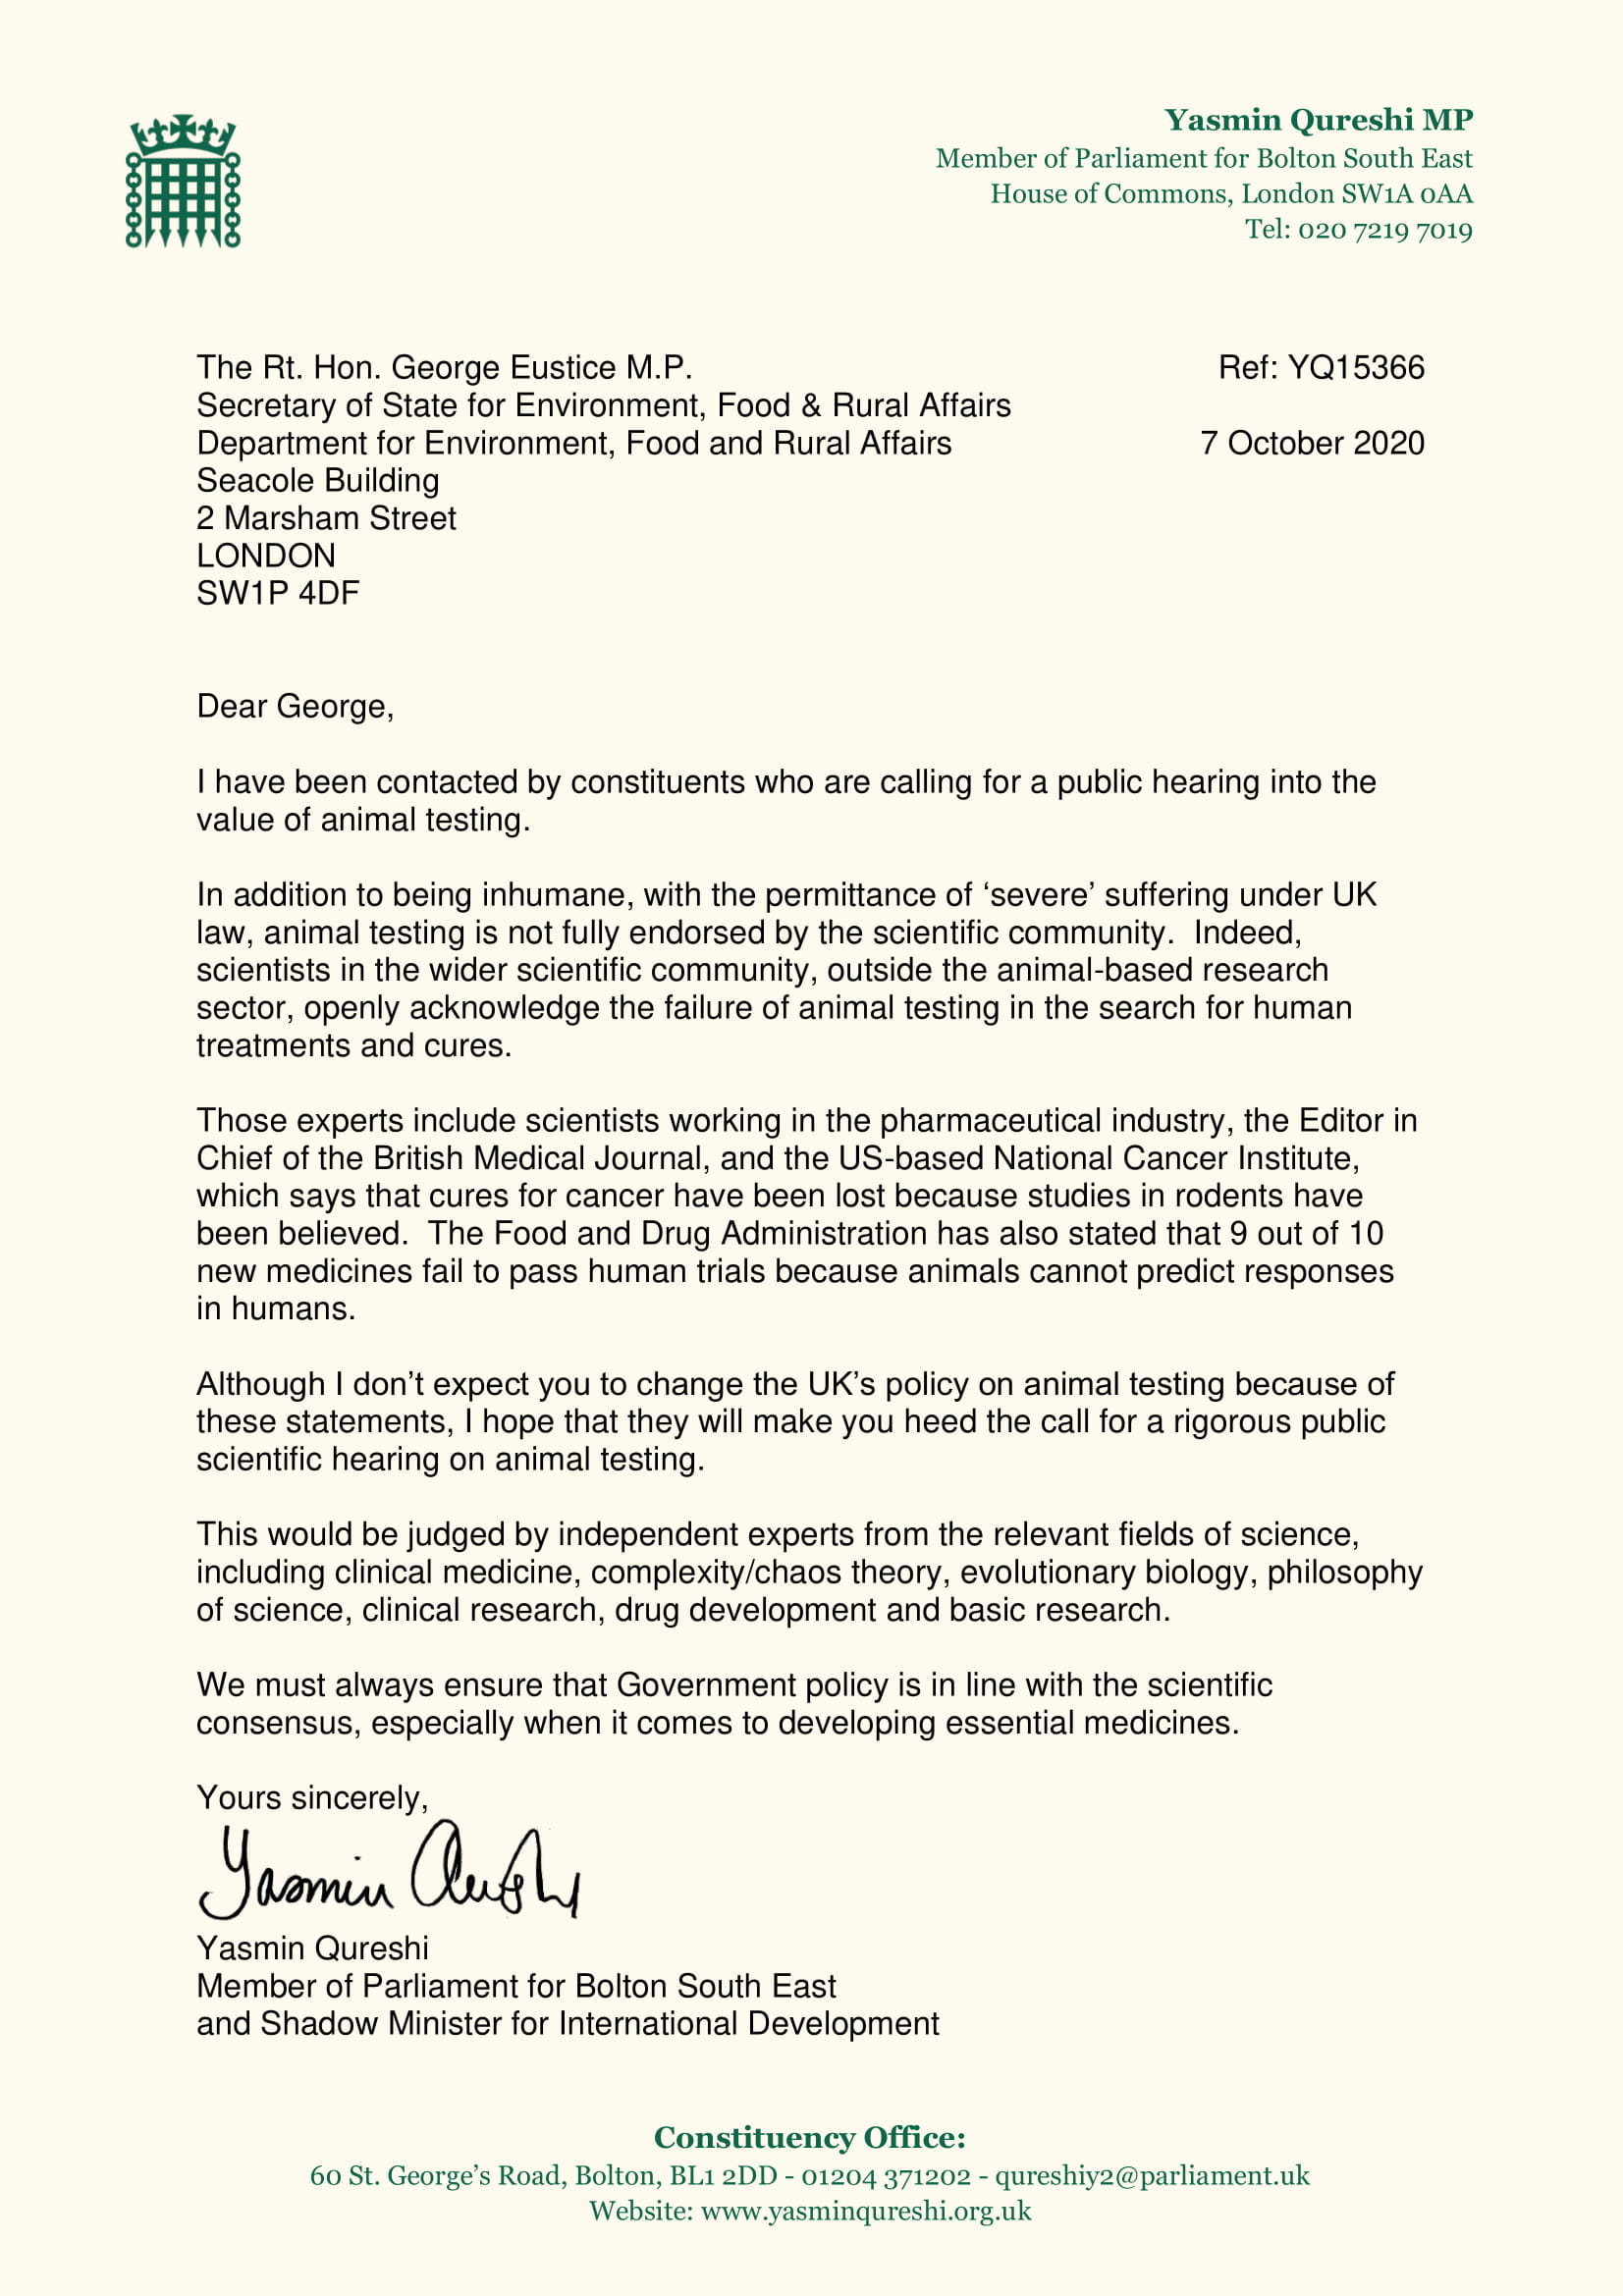 Letter to George Eustice